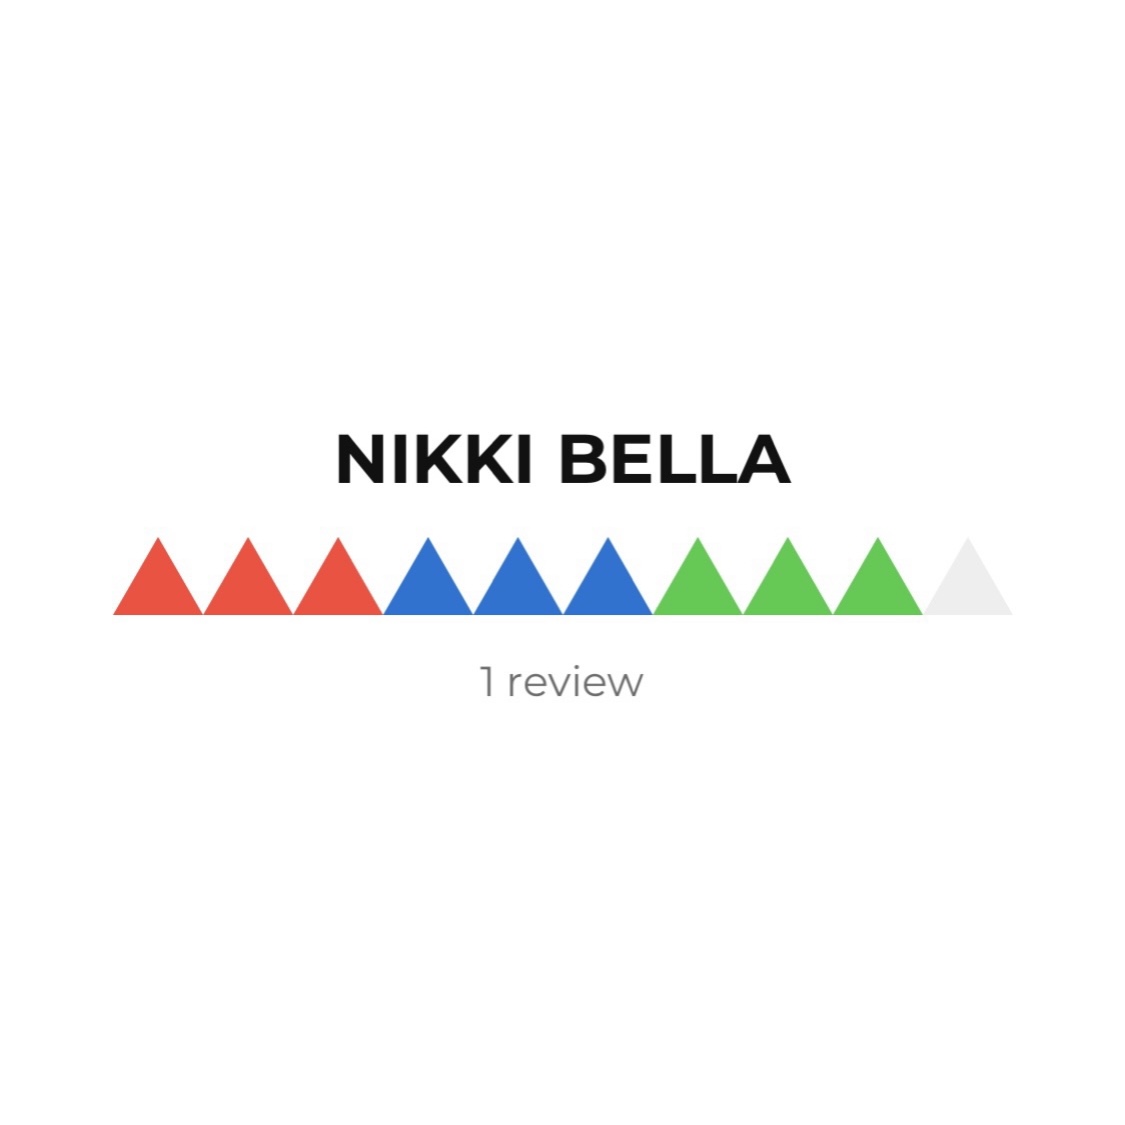 NIKKI BELLA was reviewed on RevAAA #nikkibella 

Review Anything Anyone Anywhere at https://t.co/zjInAqAmrW https://t.co/OB9CnpAFOe